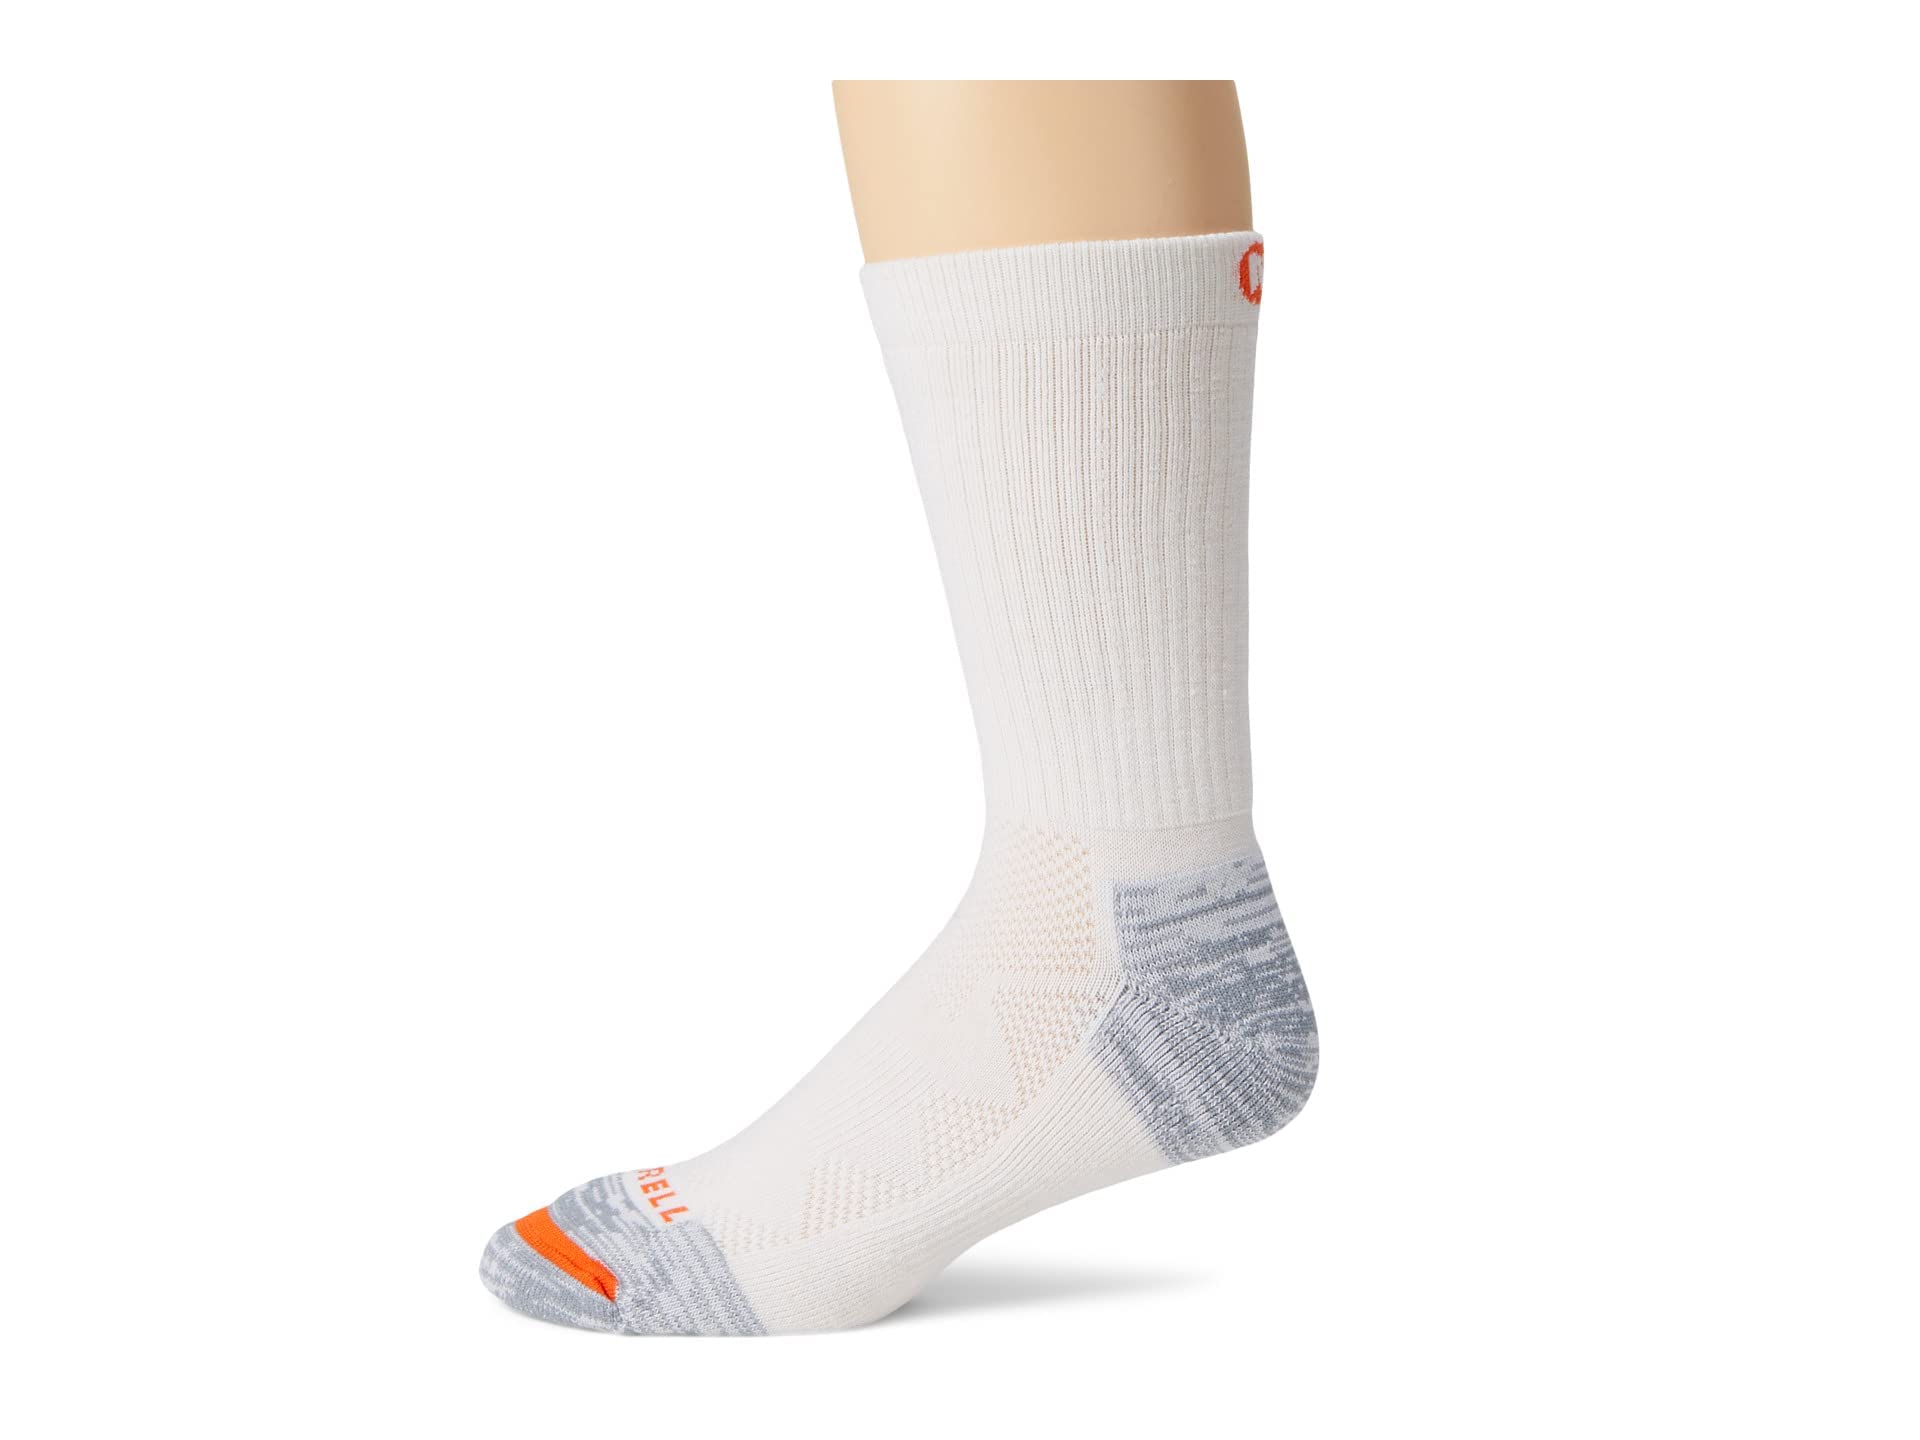 Merrell Men's and Women's Premium Wool Work Crew Socks-Unisex Arch Support Band and Breathable Mesh Zones